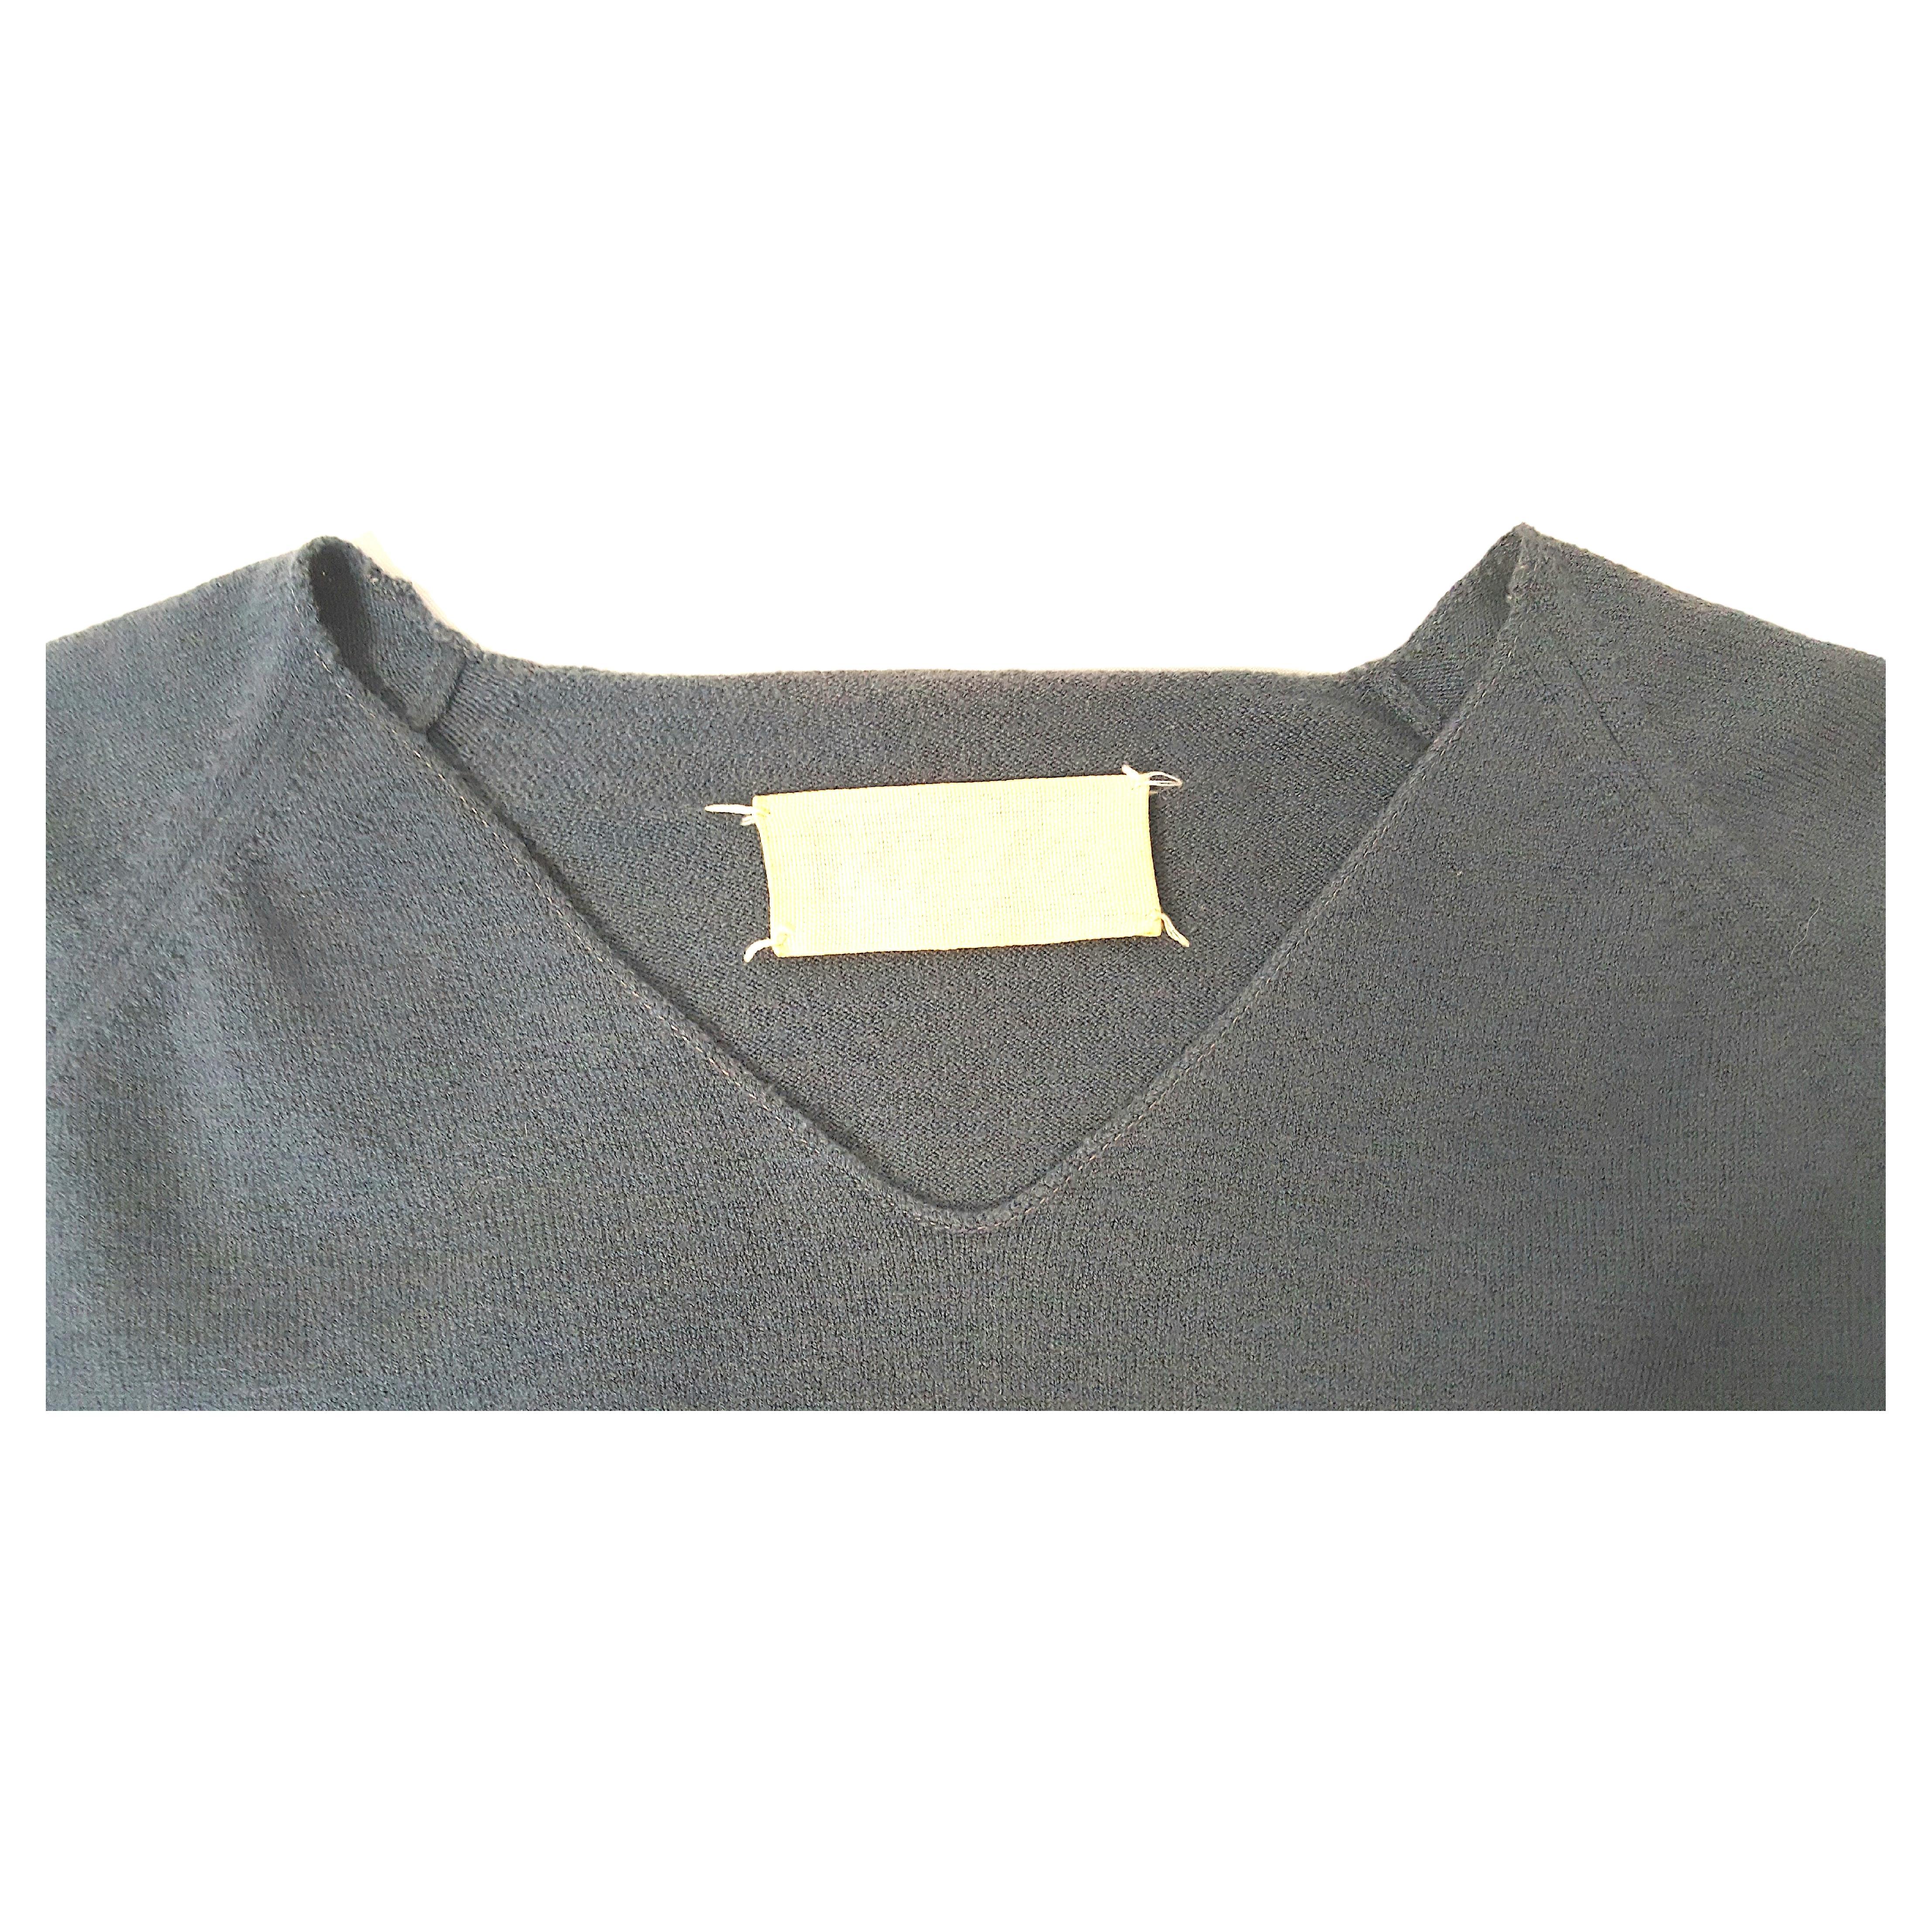 Couture MartinMargiela 1994 Artisanal Line0 UpcycledSocks Overdyed Pullover In Excellent Condition For Sale In Chicago, IL